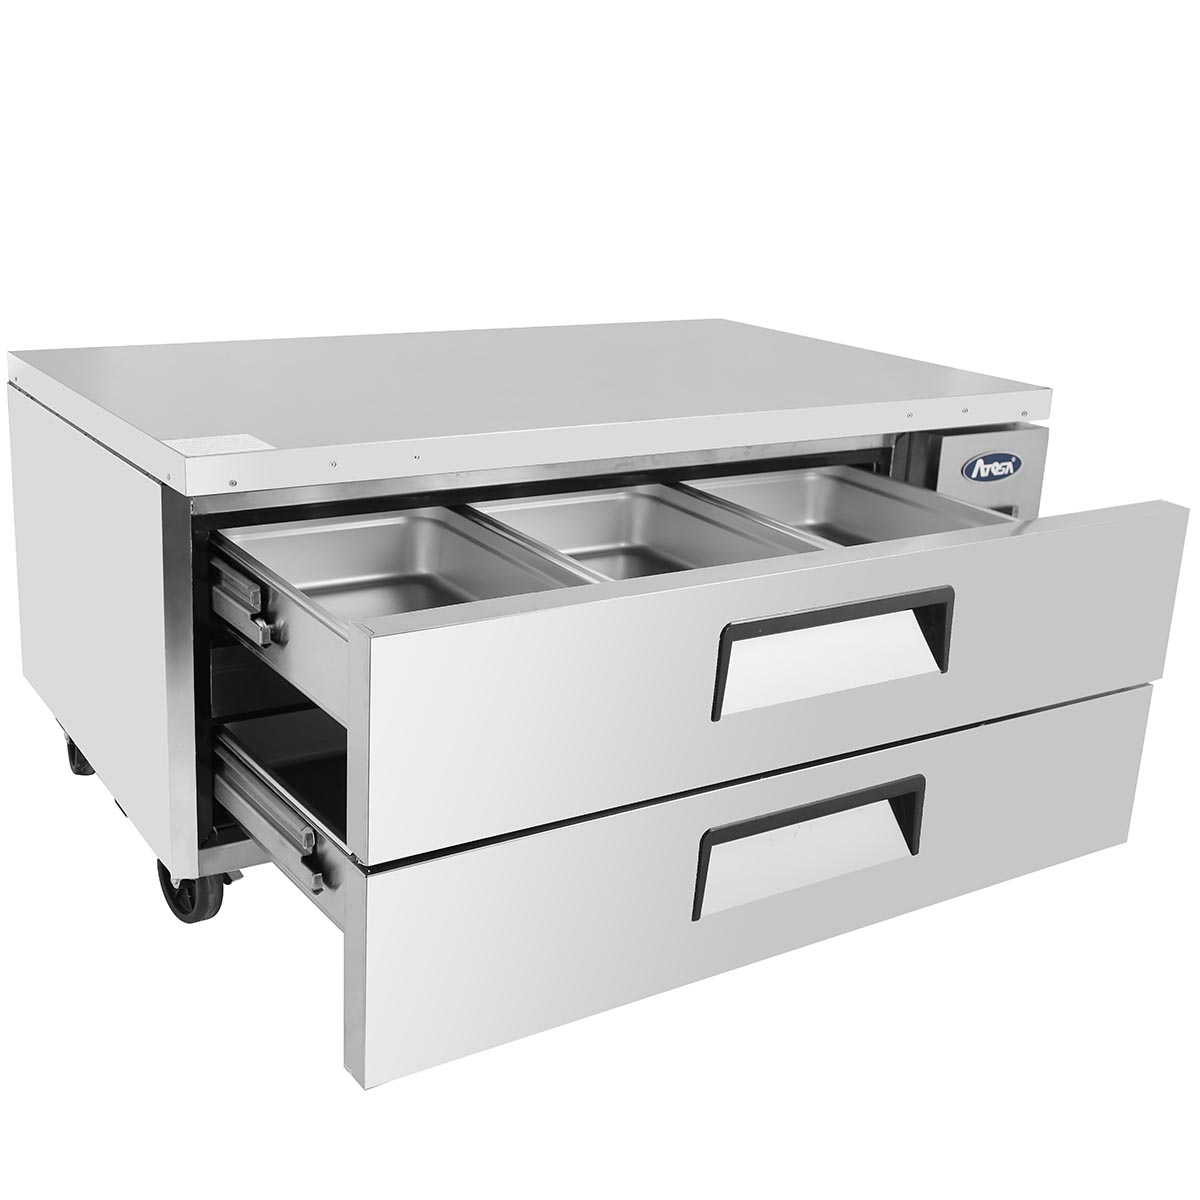 Atosa MGF8451GR One Section Side Mount Refrigerated Chef Base 52-1/16"W X 32-1/16"D X 26-19/32"H with 2 Drawers image 1